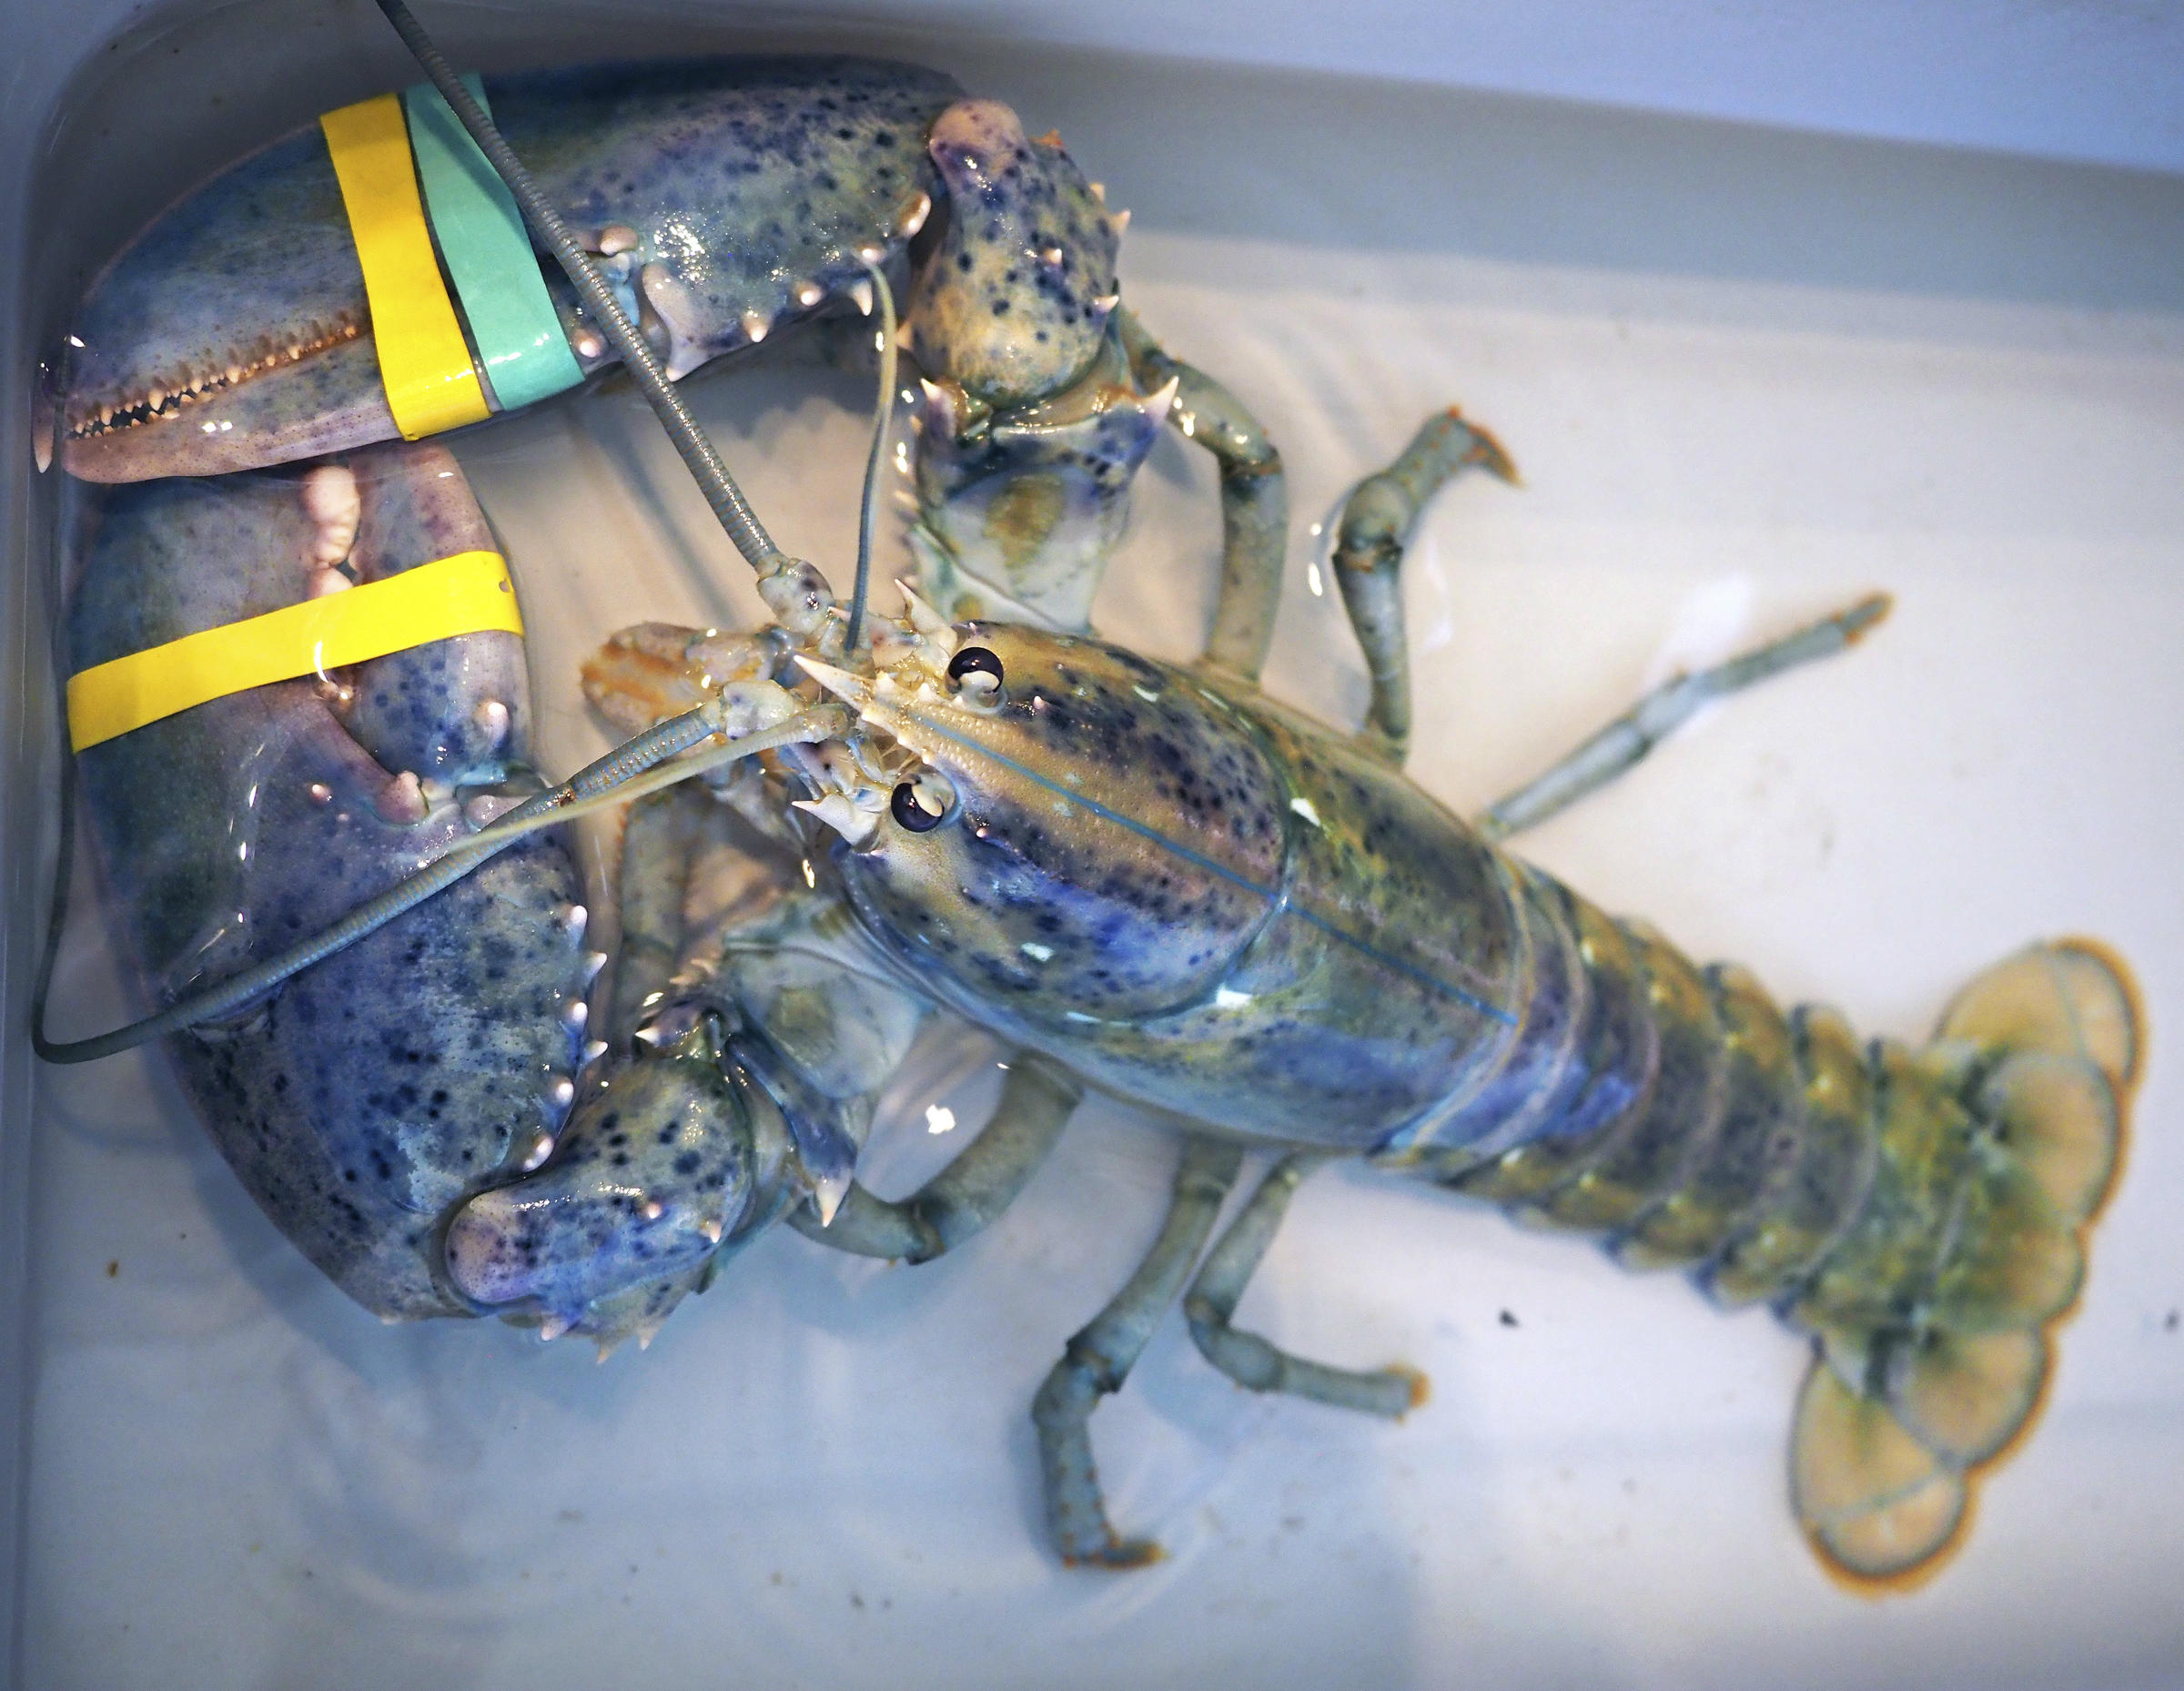 TSA Finds 20-Pound Lobster in Checked Bag